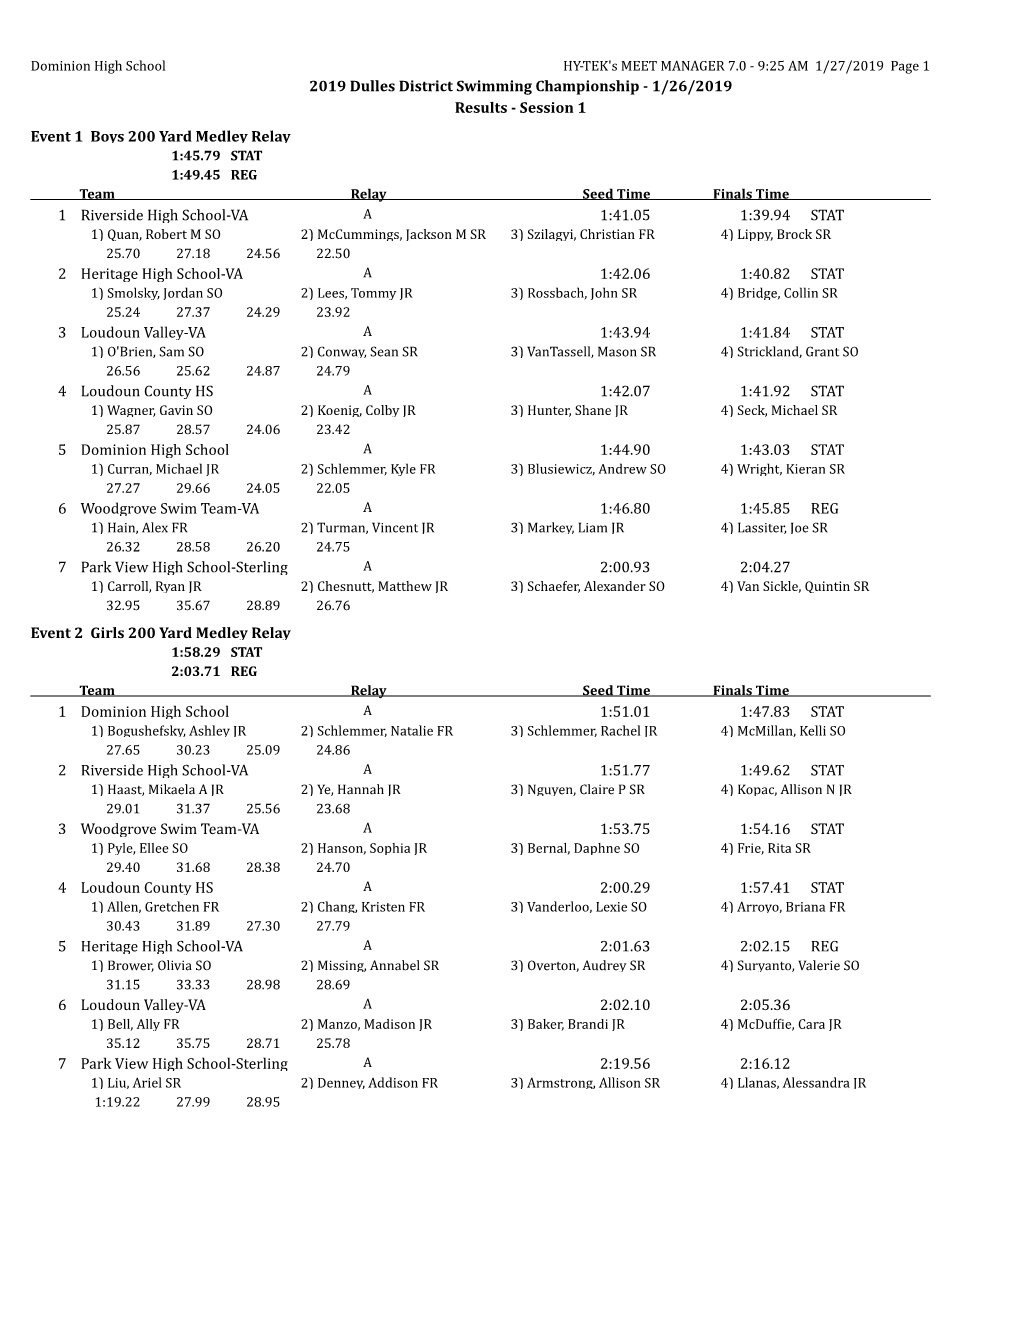 2019 Dulles District Swimming Championship - 1/26/2019 Results - Session 1